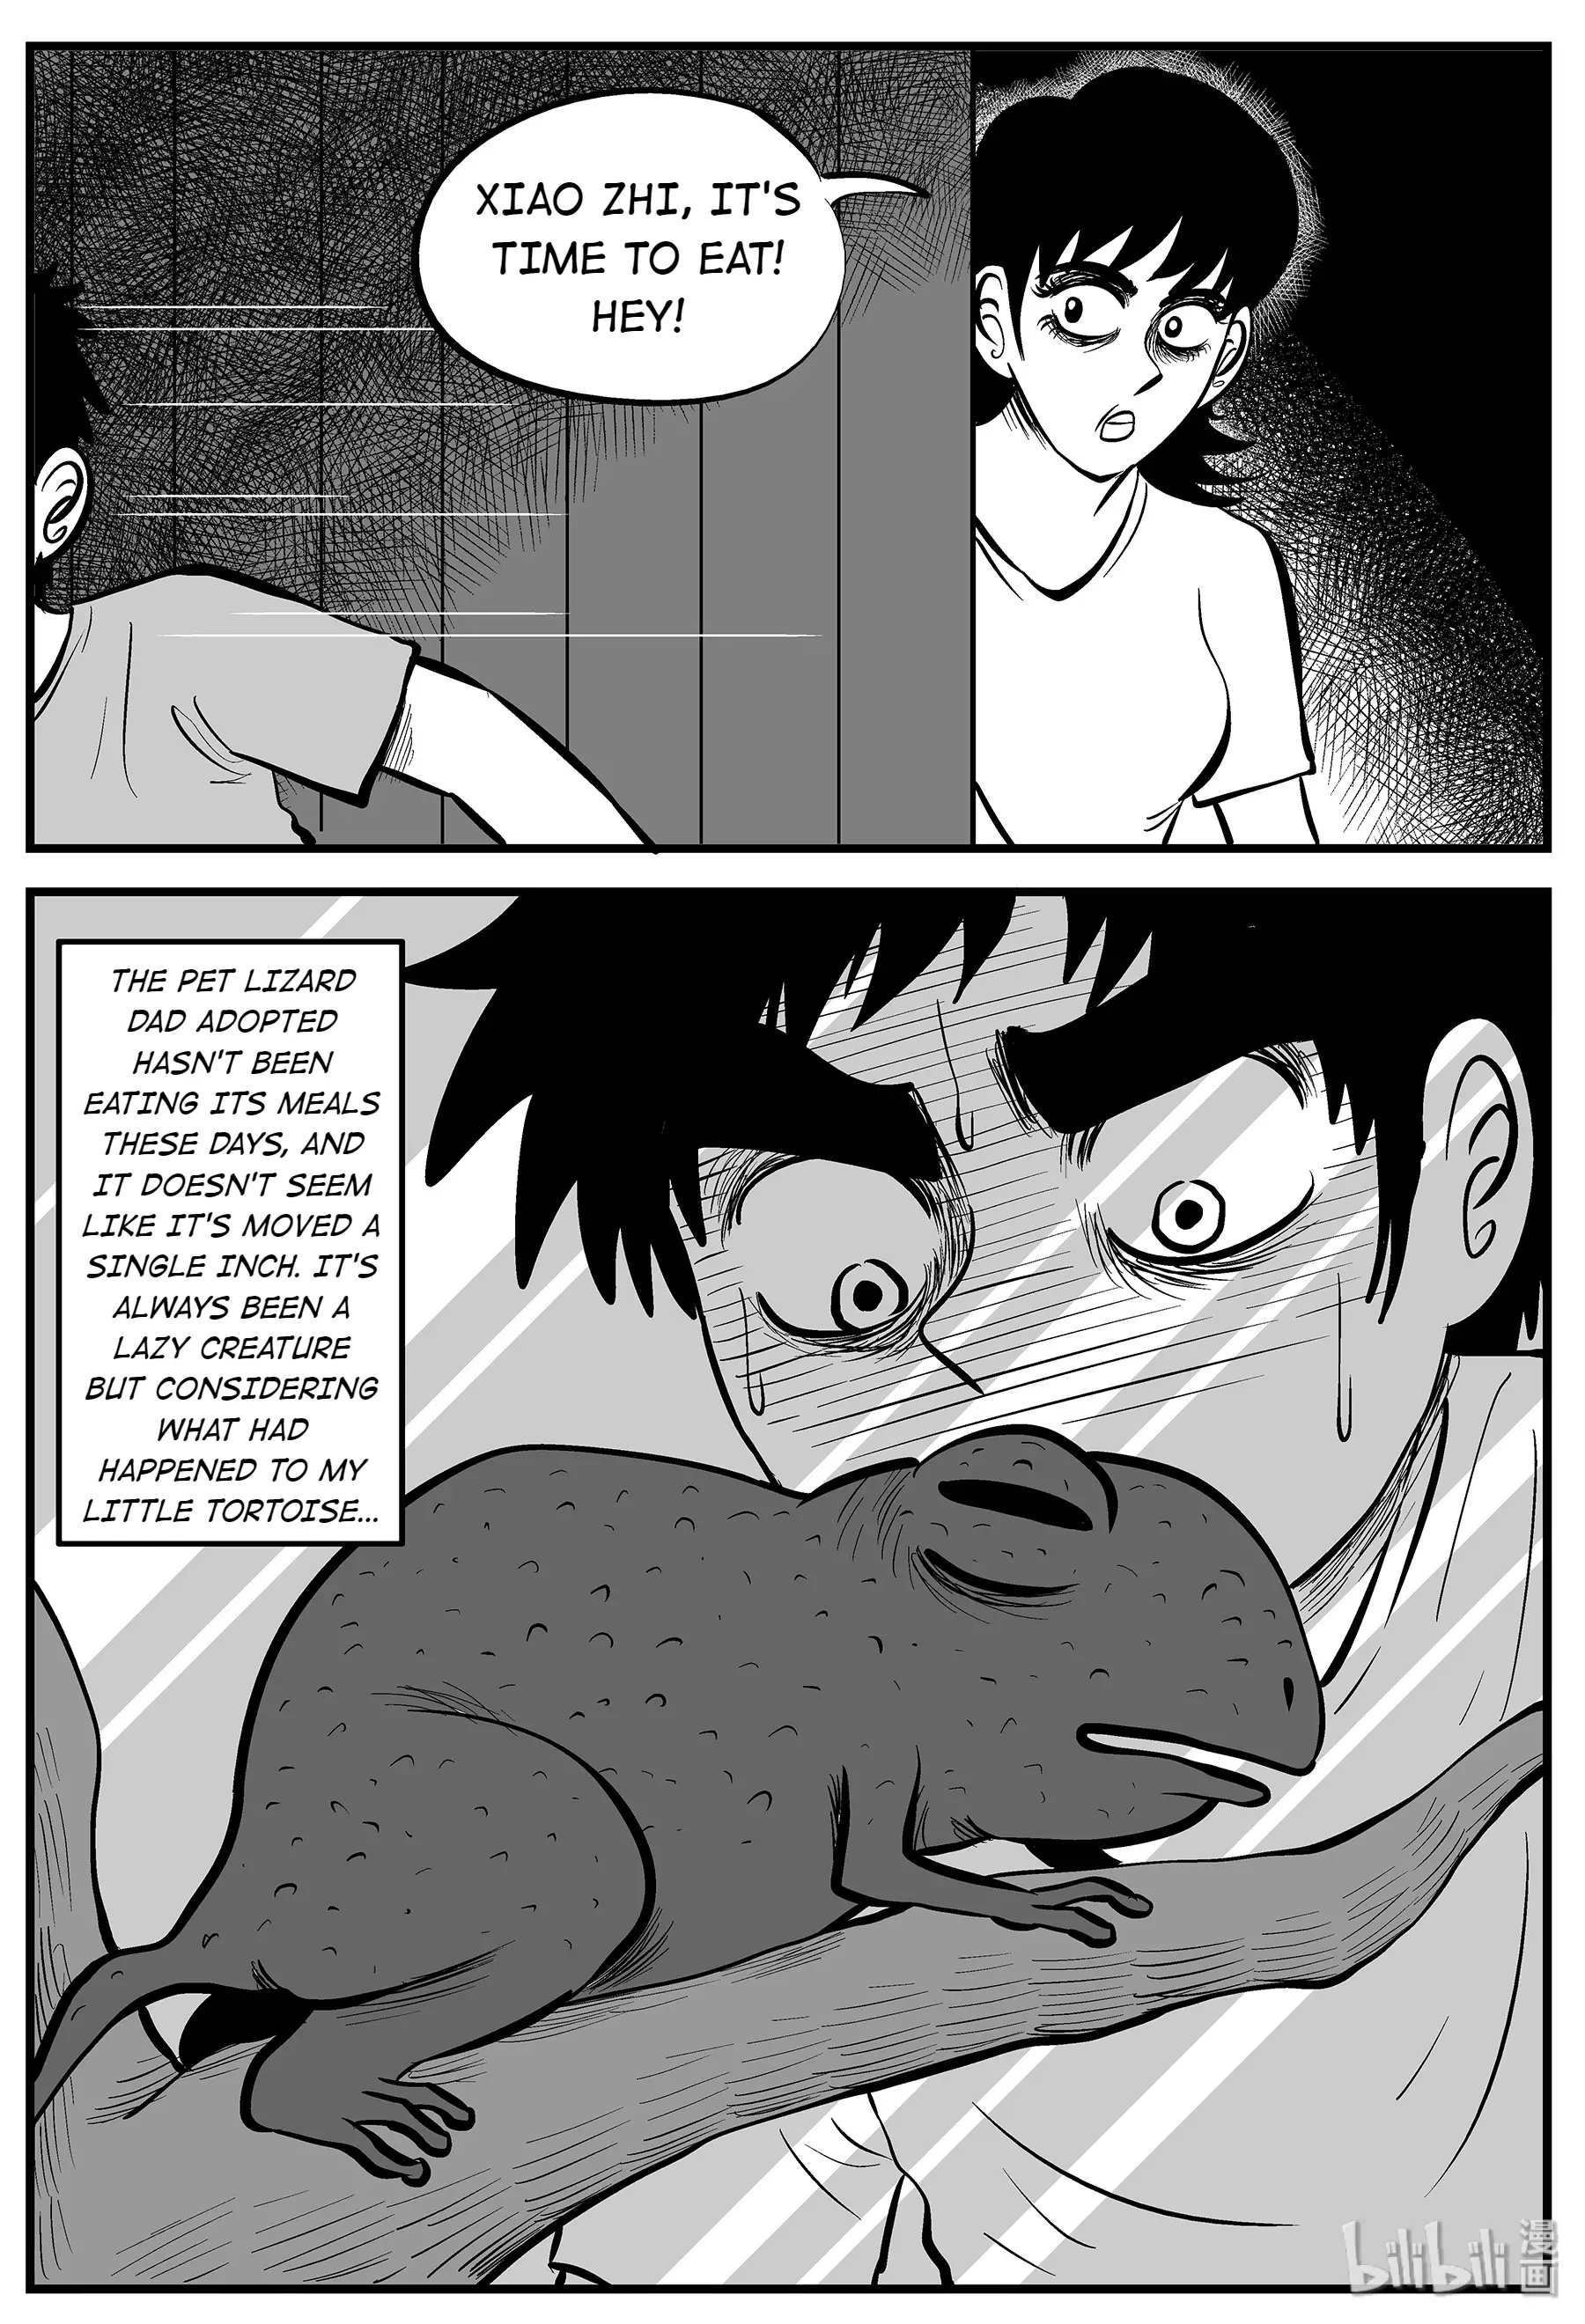 Strange Tales Of Xiao Zhi - 5 page 16